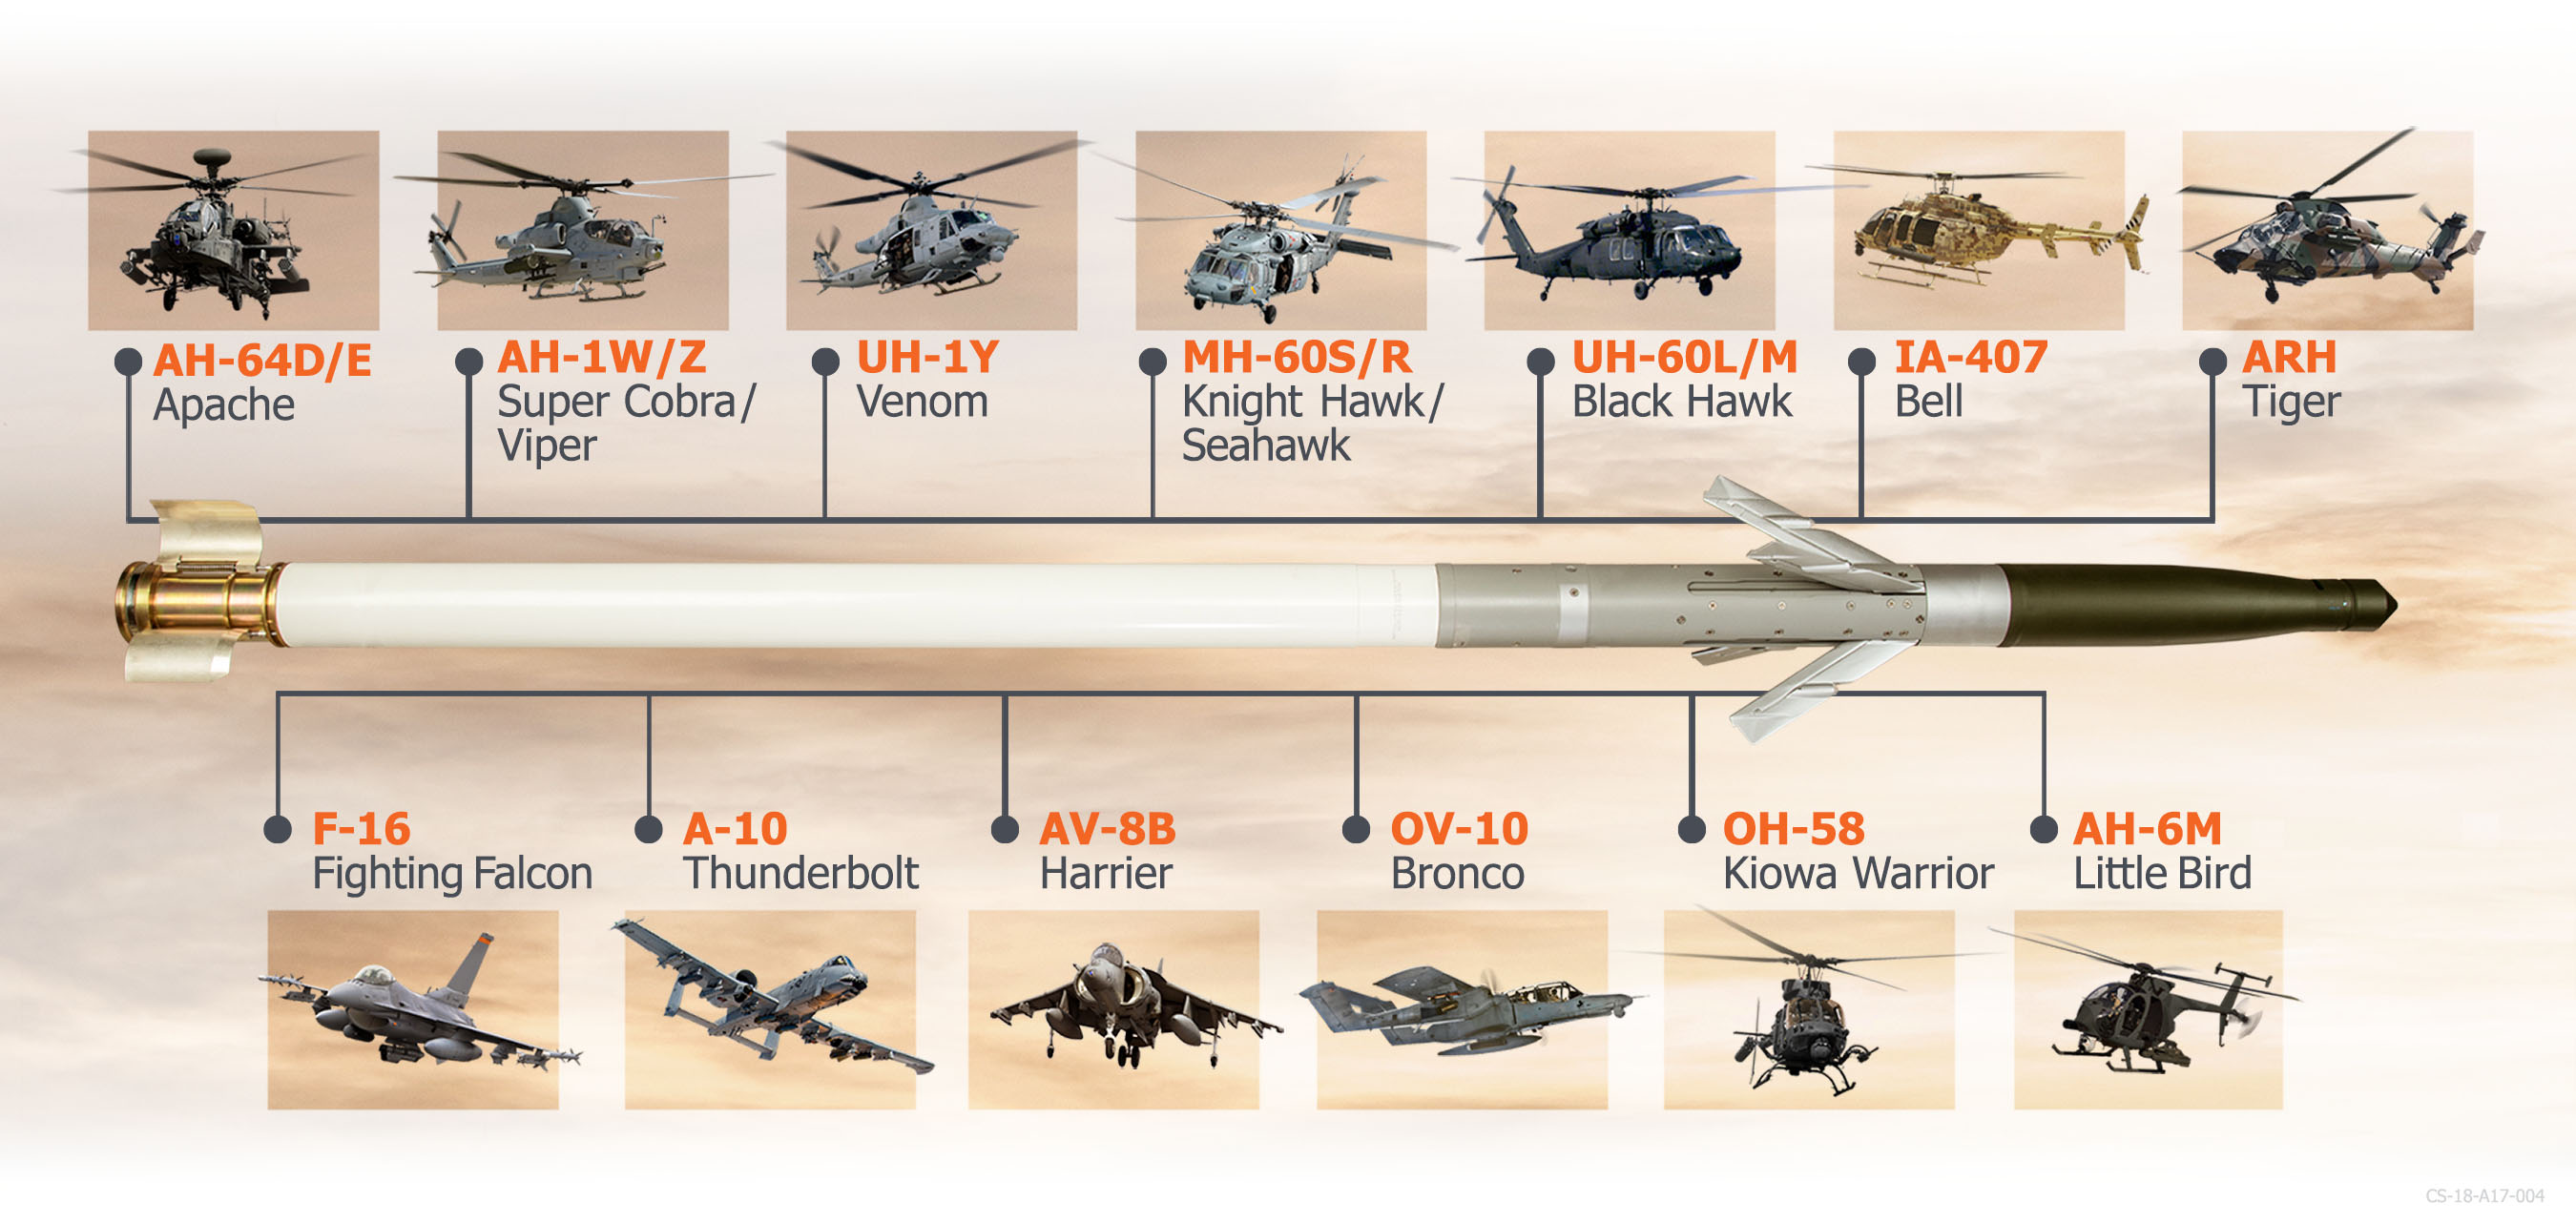 The APKWS rocket exceeds program requirements as the most accurate precision guided weapon in its class. It is utilized by all four U.S. armed forces, with deliveries to numerous allied countries.Fired from more than 20 different fixed- and rotary-wing platforms